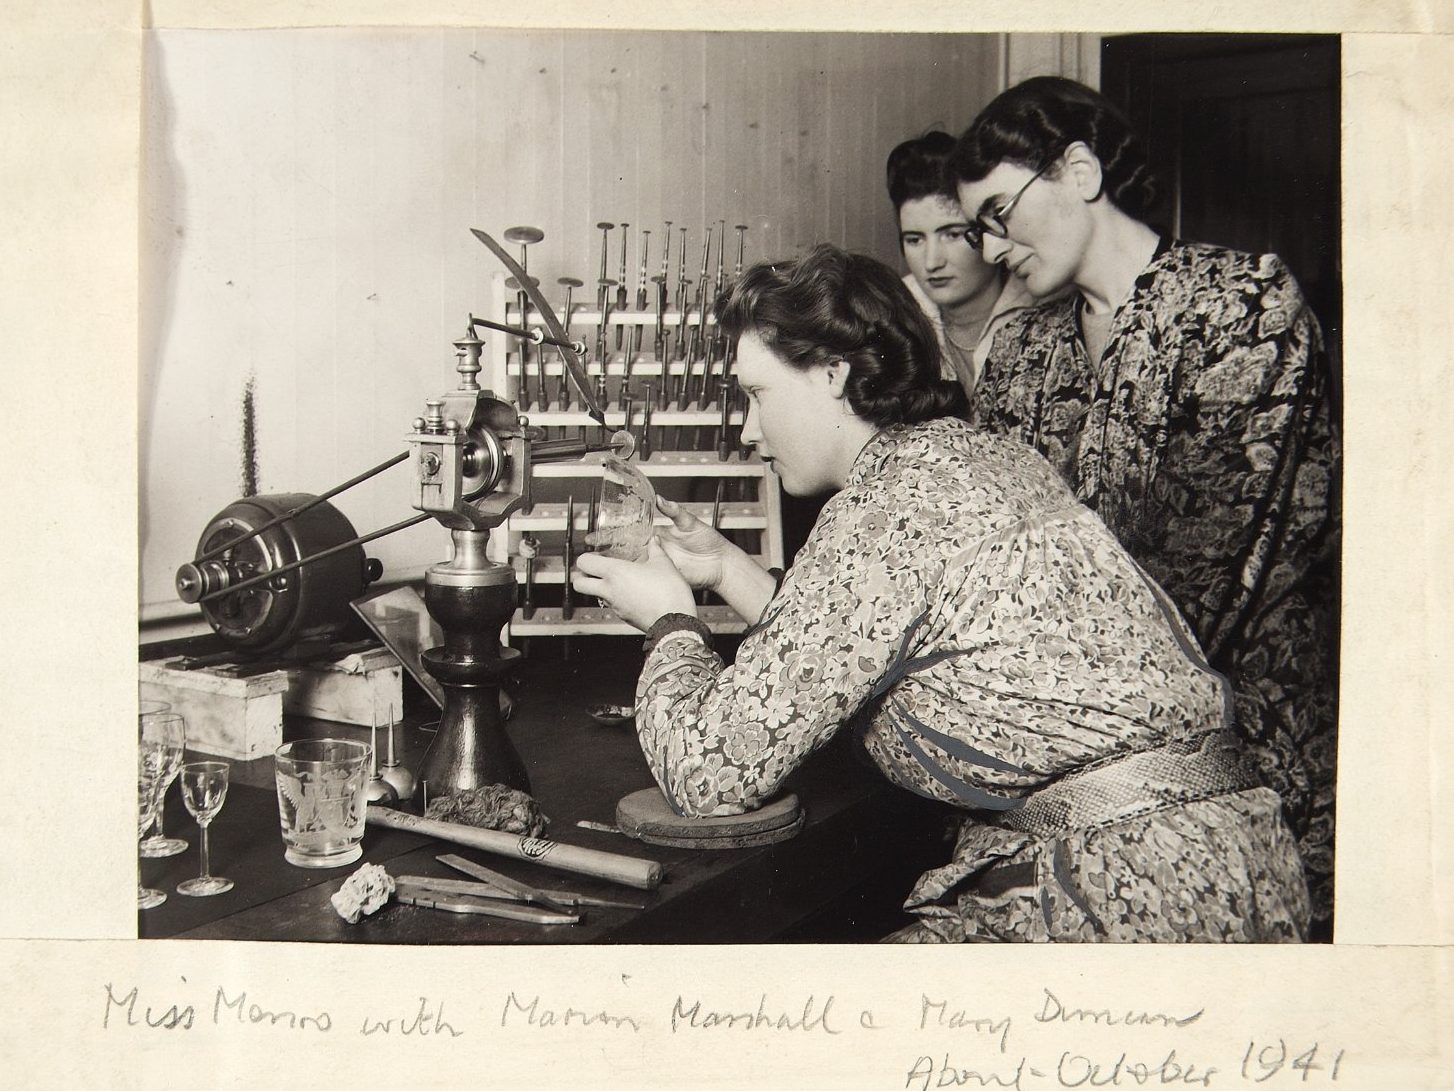 Black and white photo framed by off-white paper bearing pencil script at the bottom dating it to 1941. In the image, three women in floral dresses examine a glass object at a wooden table filled with various tools and glass objects.